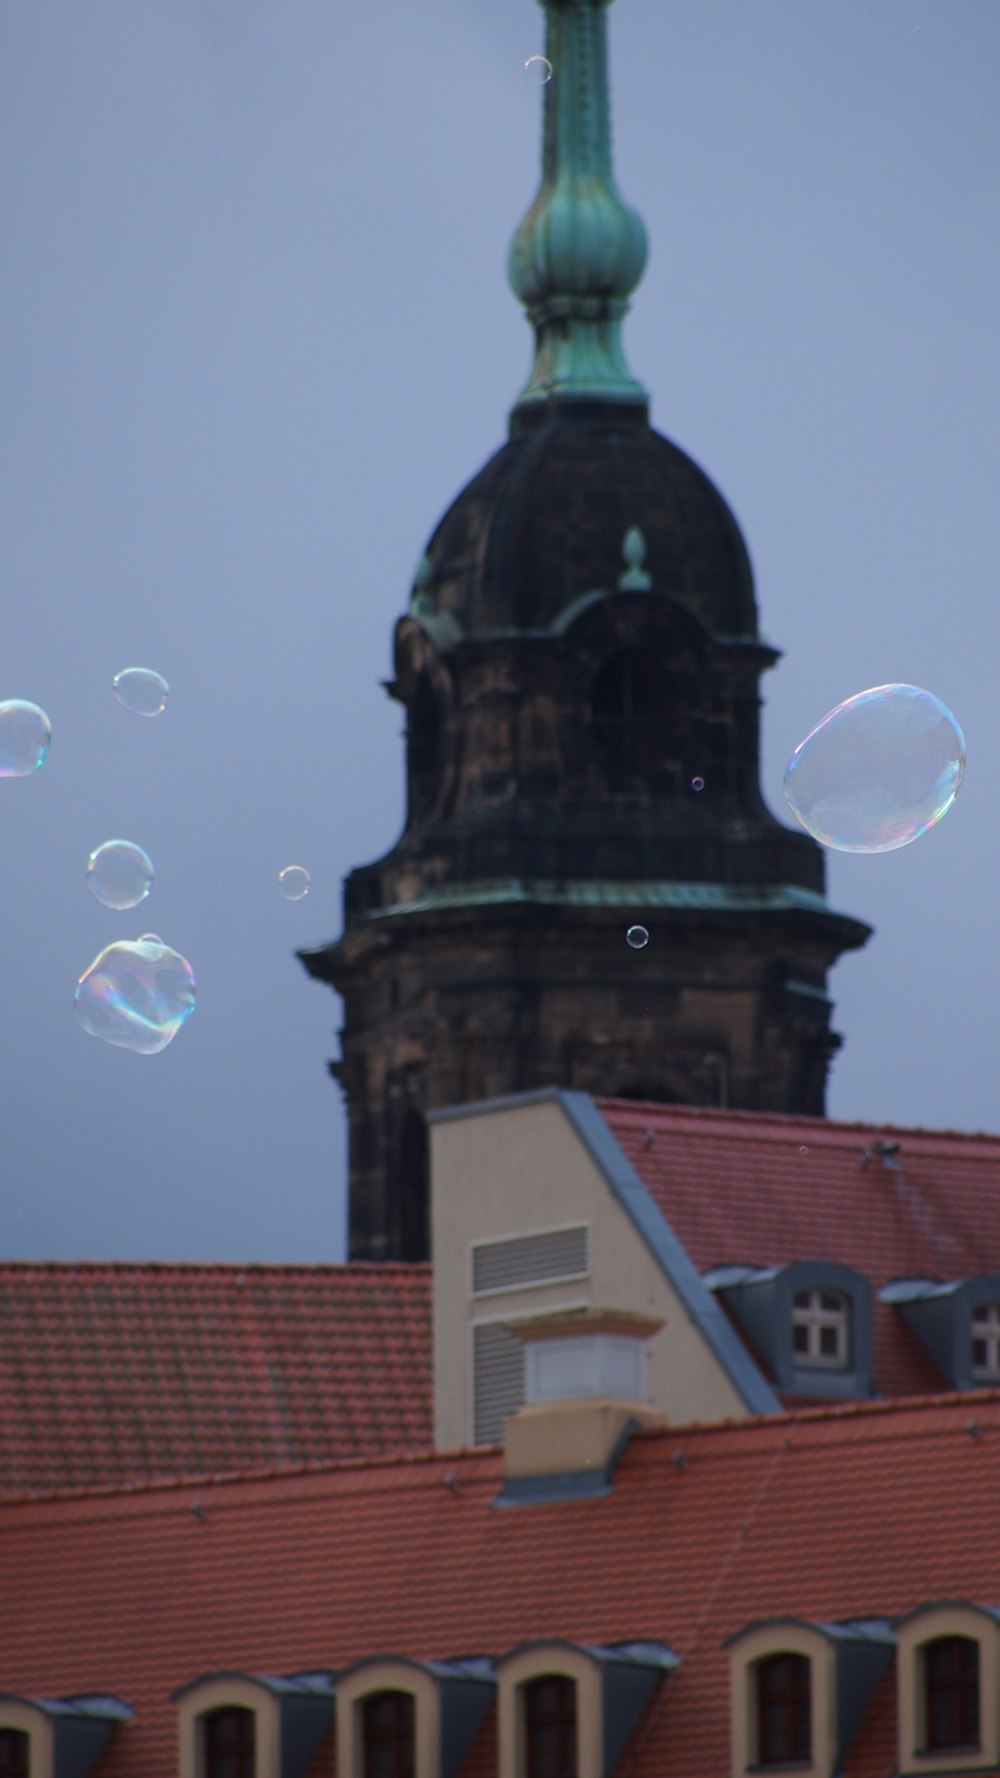 a building with a clock tower and a lot of bubbles in the air